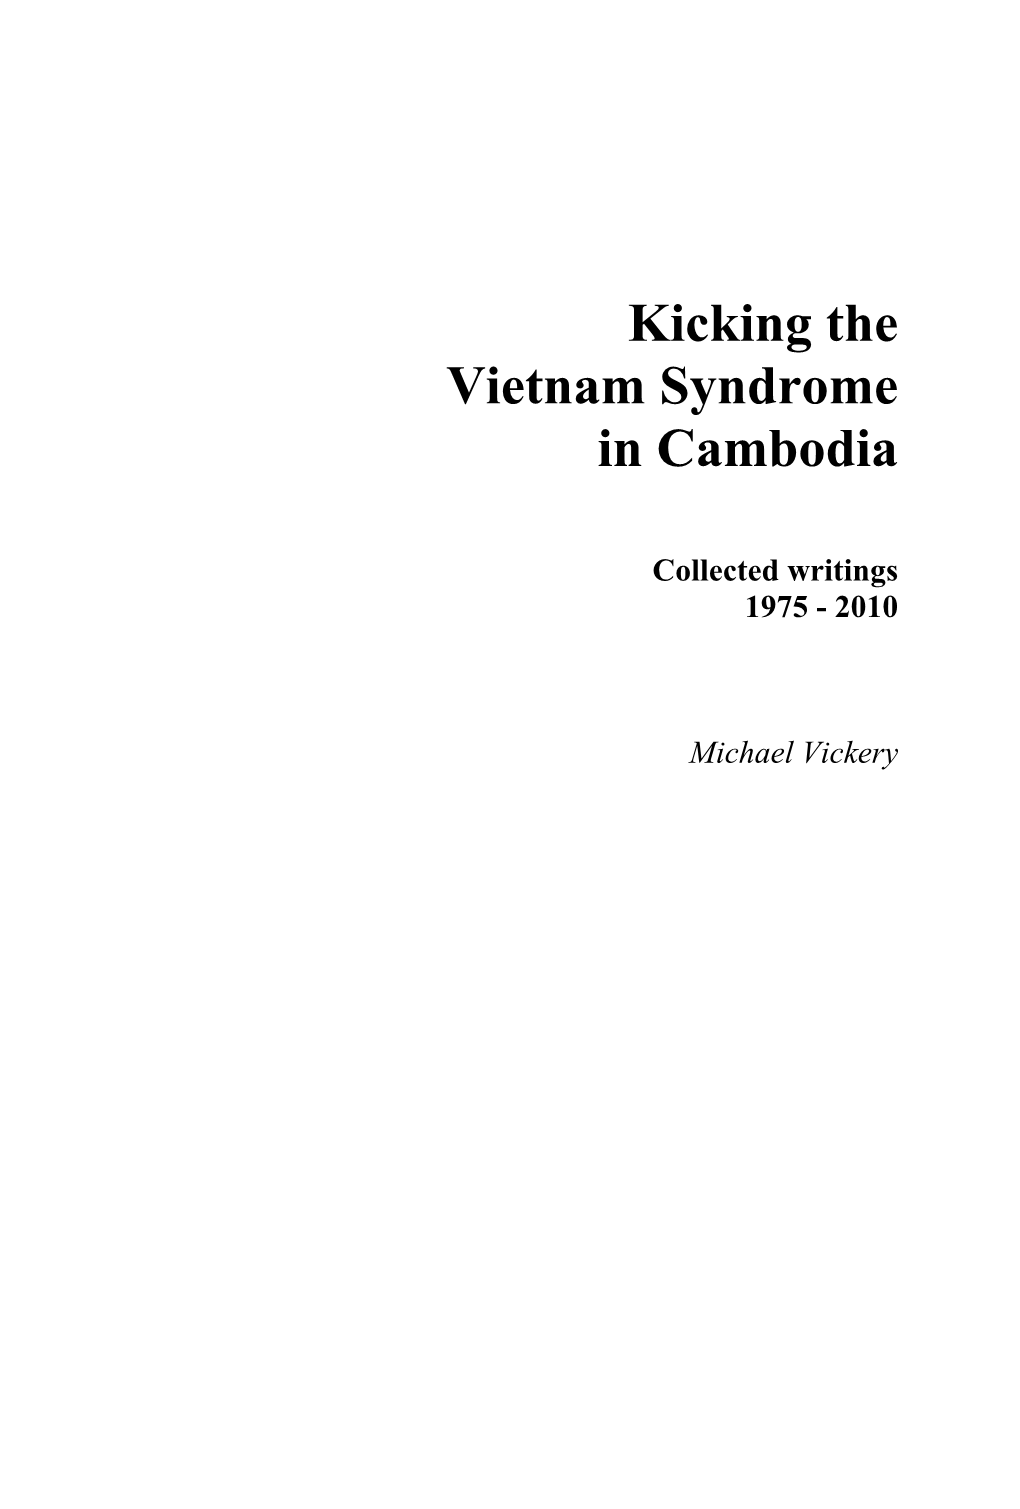 Kicking the Vietnam Syndrome in Cambodia